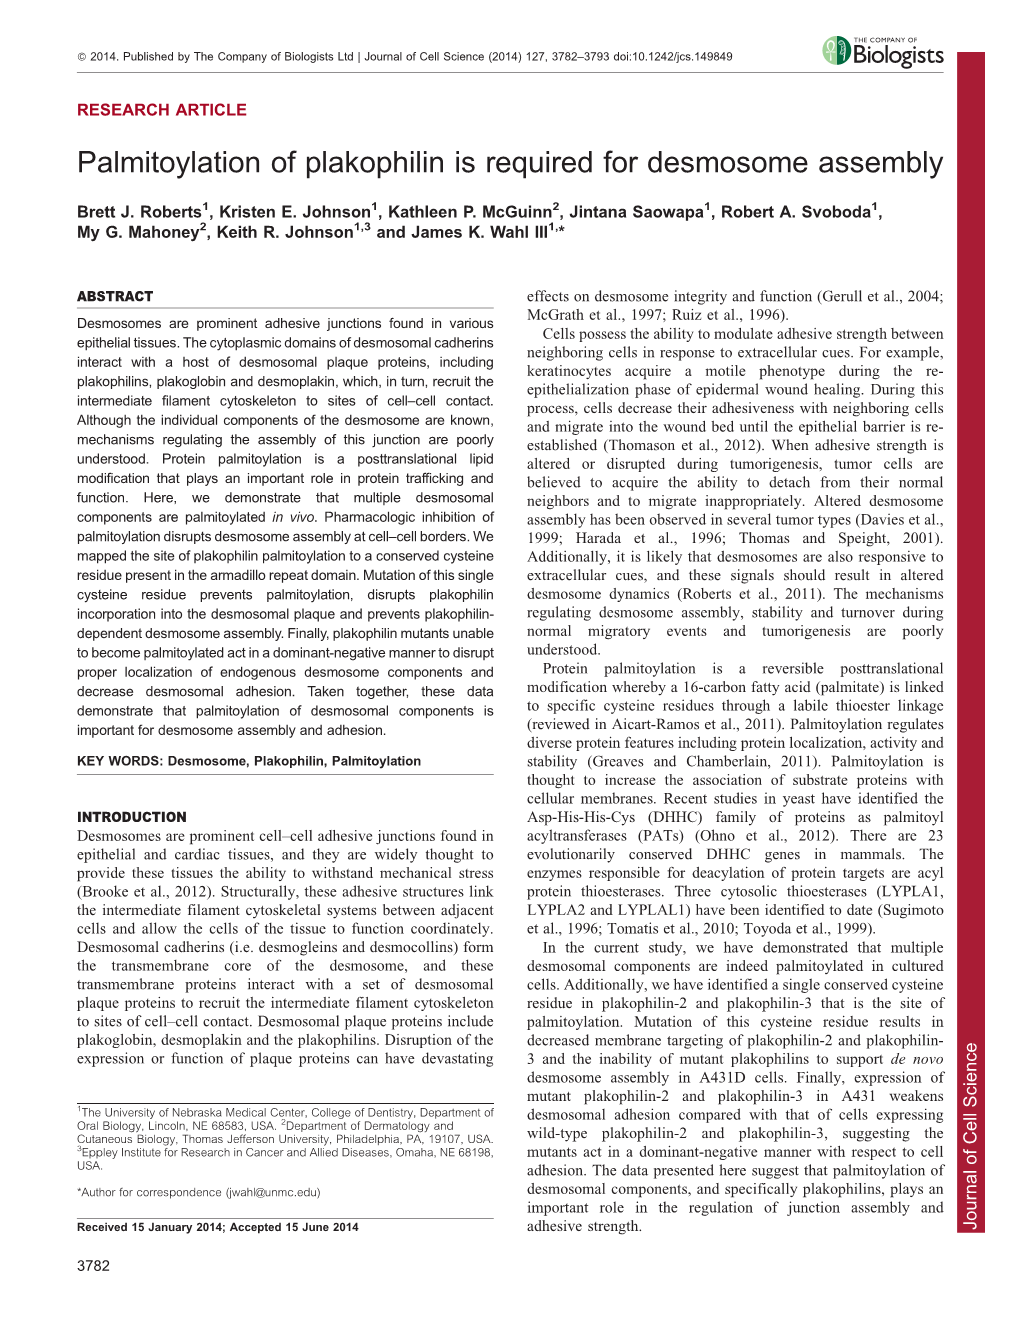 Palmitoylation of Plakophilin Is Required for Desmosome Assembly